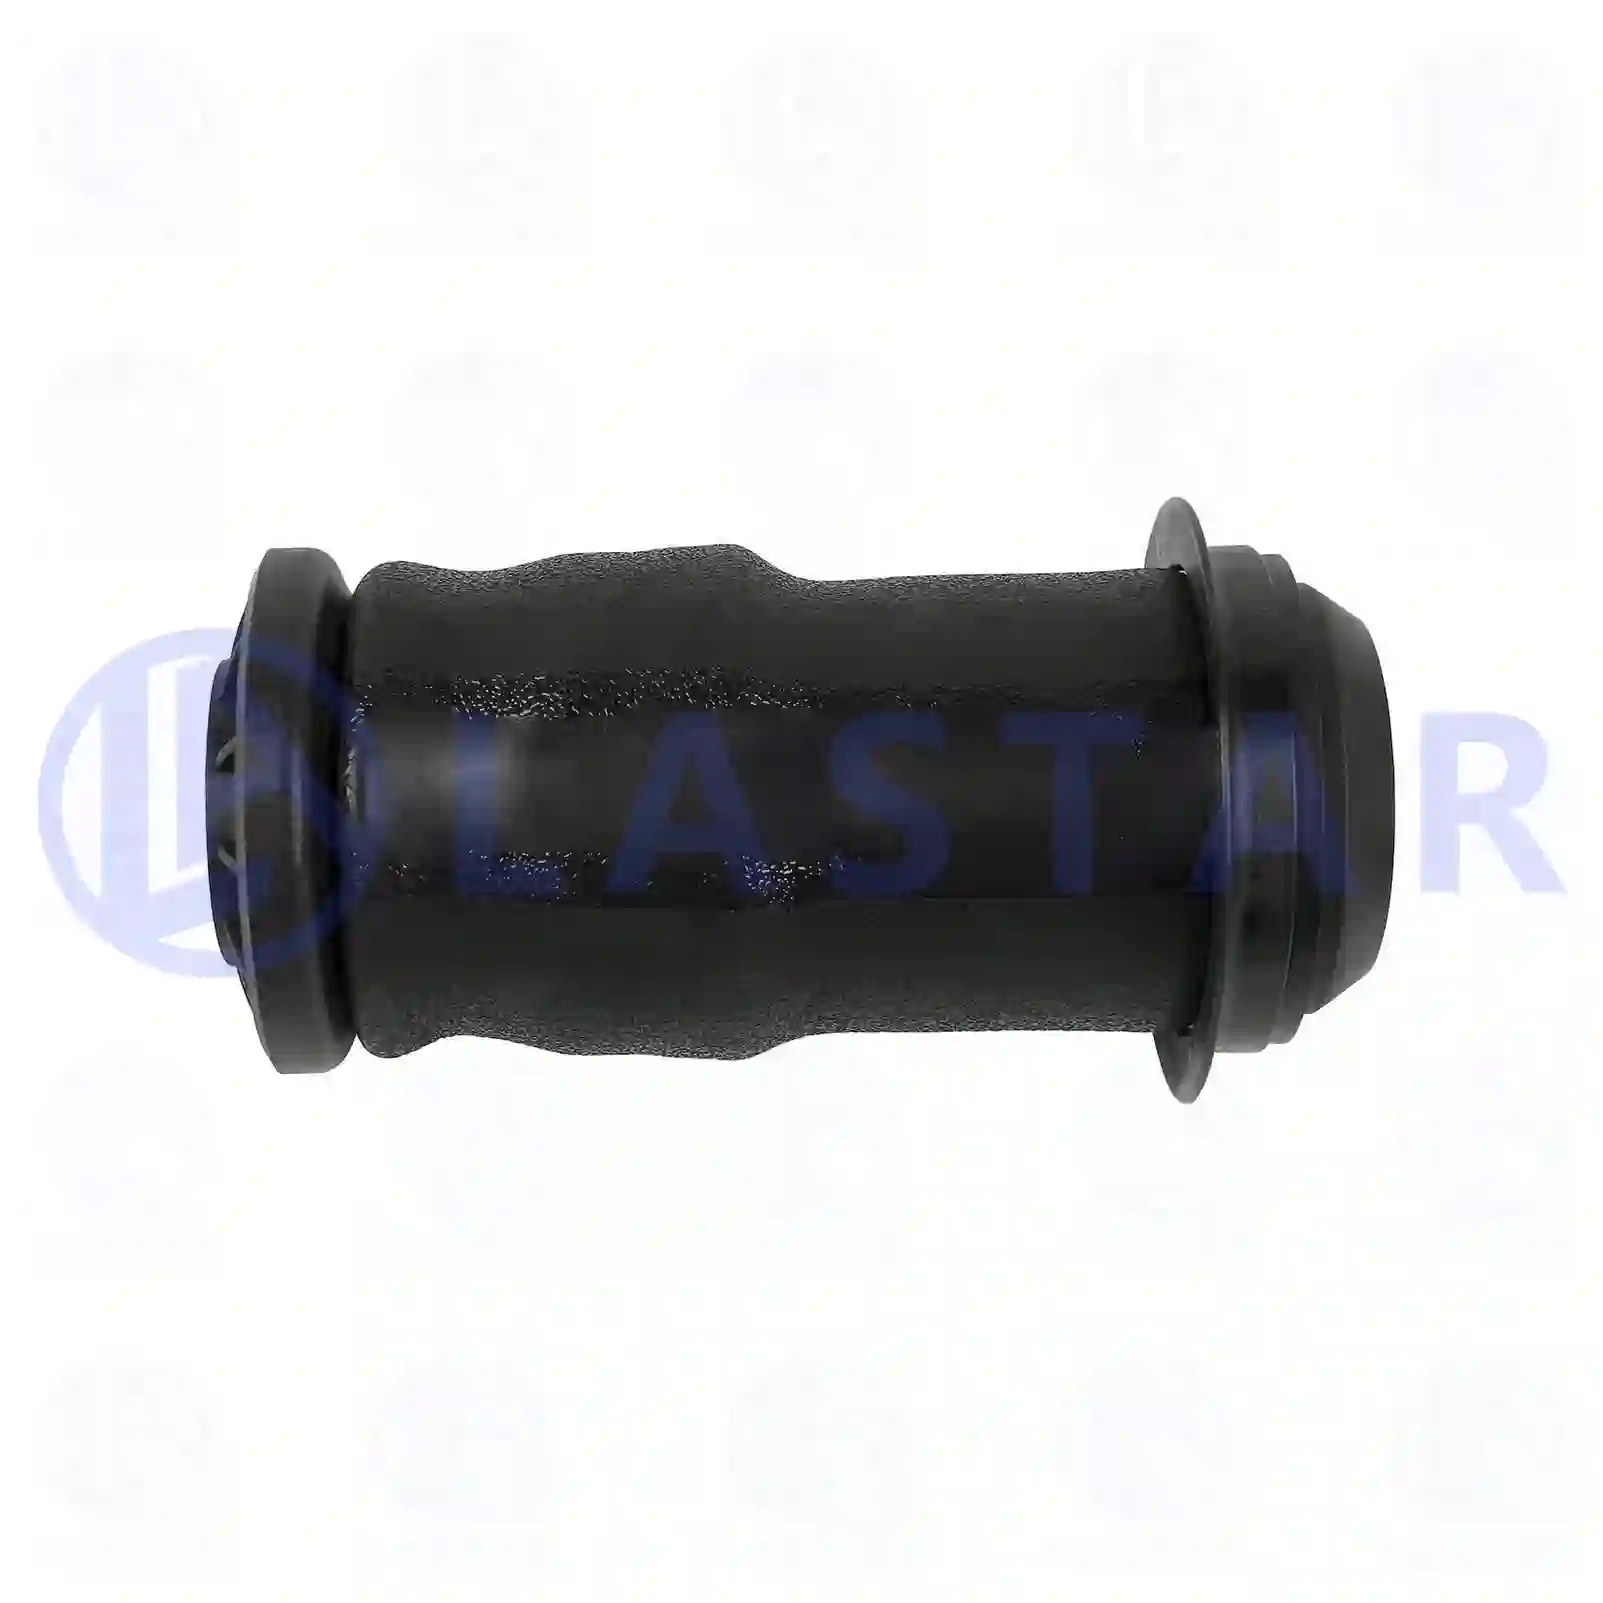 Air bellow, cabin shock absorber, 77735815, 1926779, 2477112 ||  77735815 Lastar Spare Part | Truck Spare Parts, Auotomotive Spare Parts Air bellow, cabin shock absorber, 77735815, 1926779, 2477112 ||  77735815 Lastar Spare Part | Truck Spare Parts, Auotomotive Spare Parts